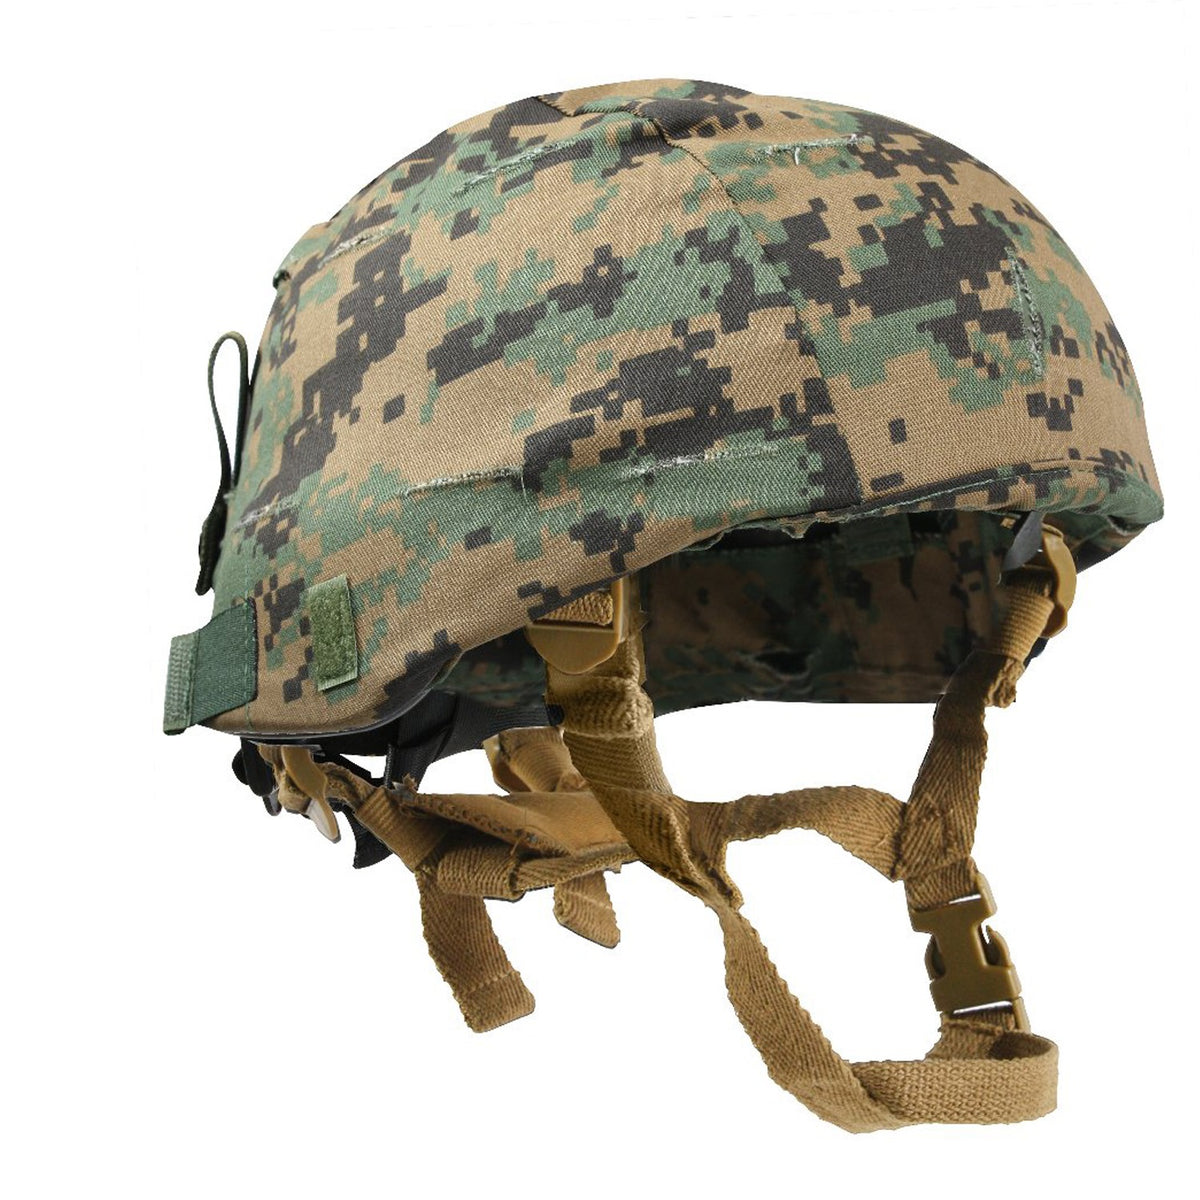 Rothco Chin Strap For MICH Helmet Woodland Camo